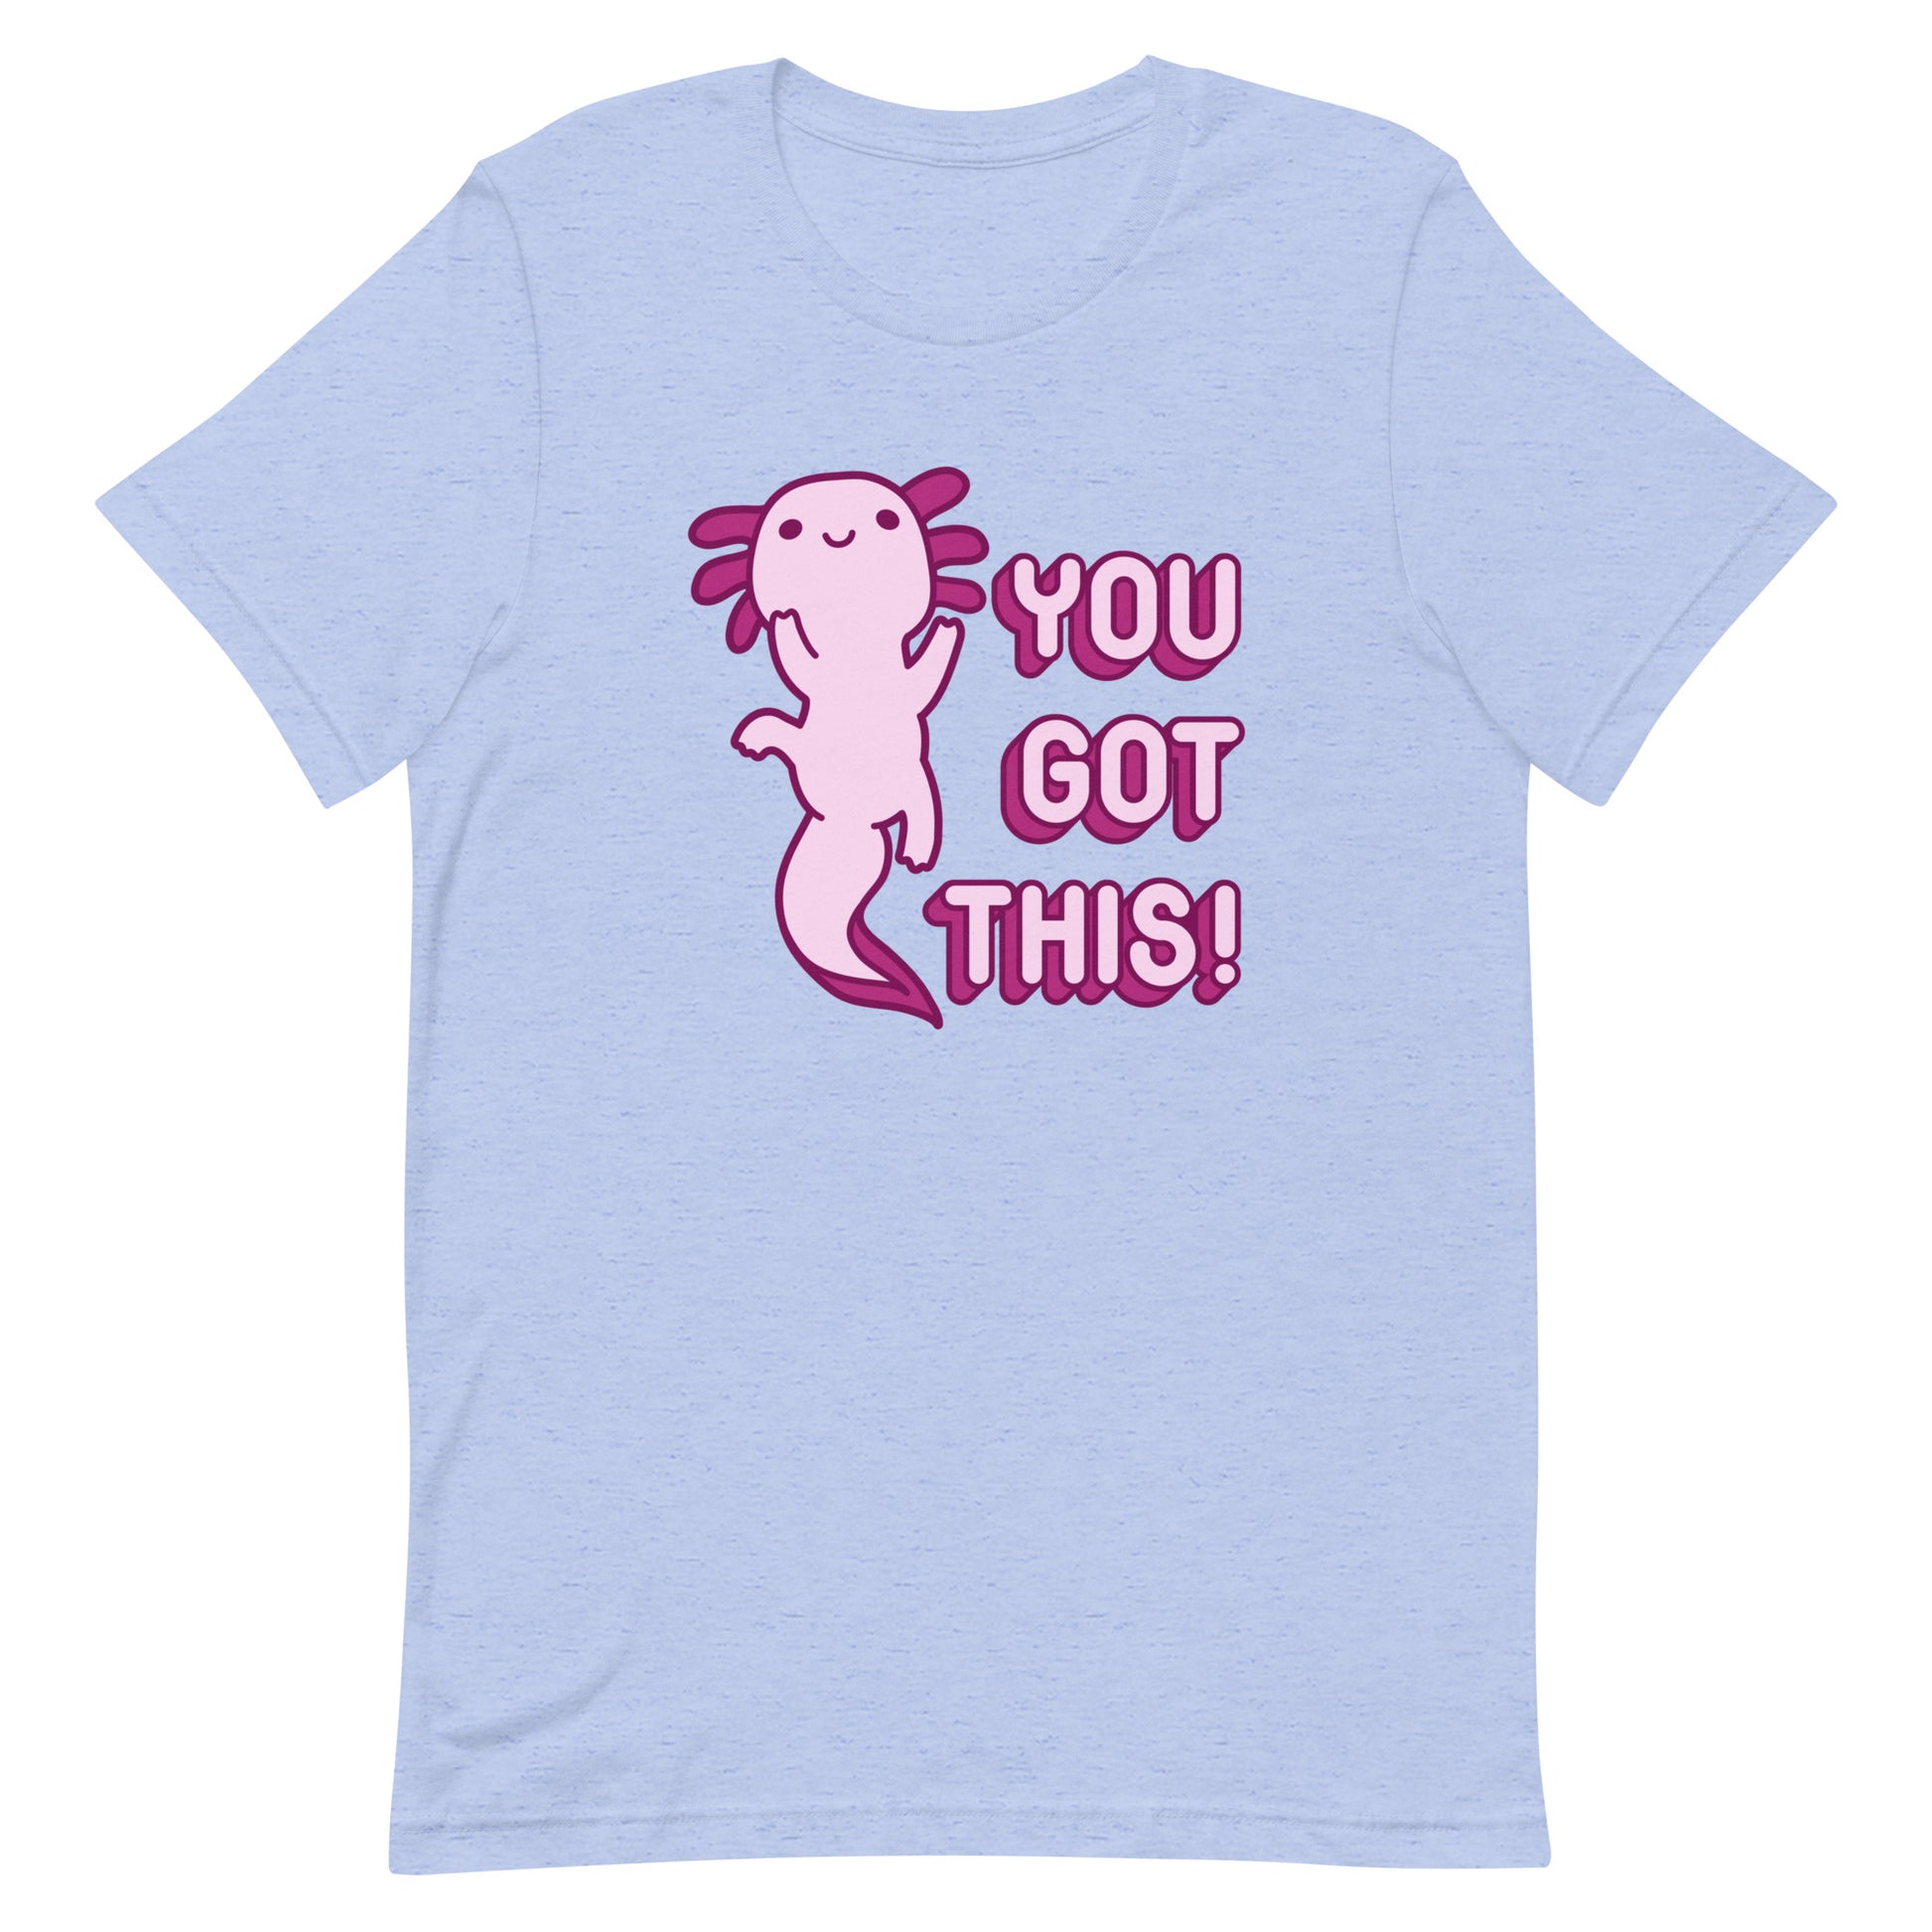 A heathered light blue t-shirt featuring a smiling axolotl and pink bubble letters that read "You got this!"